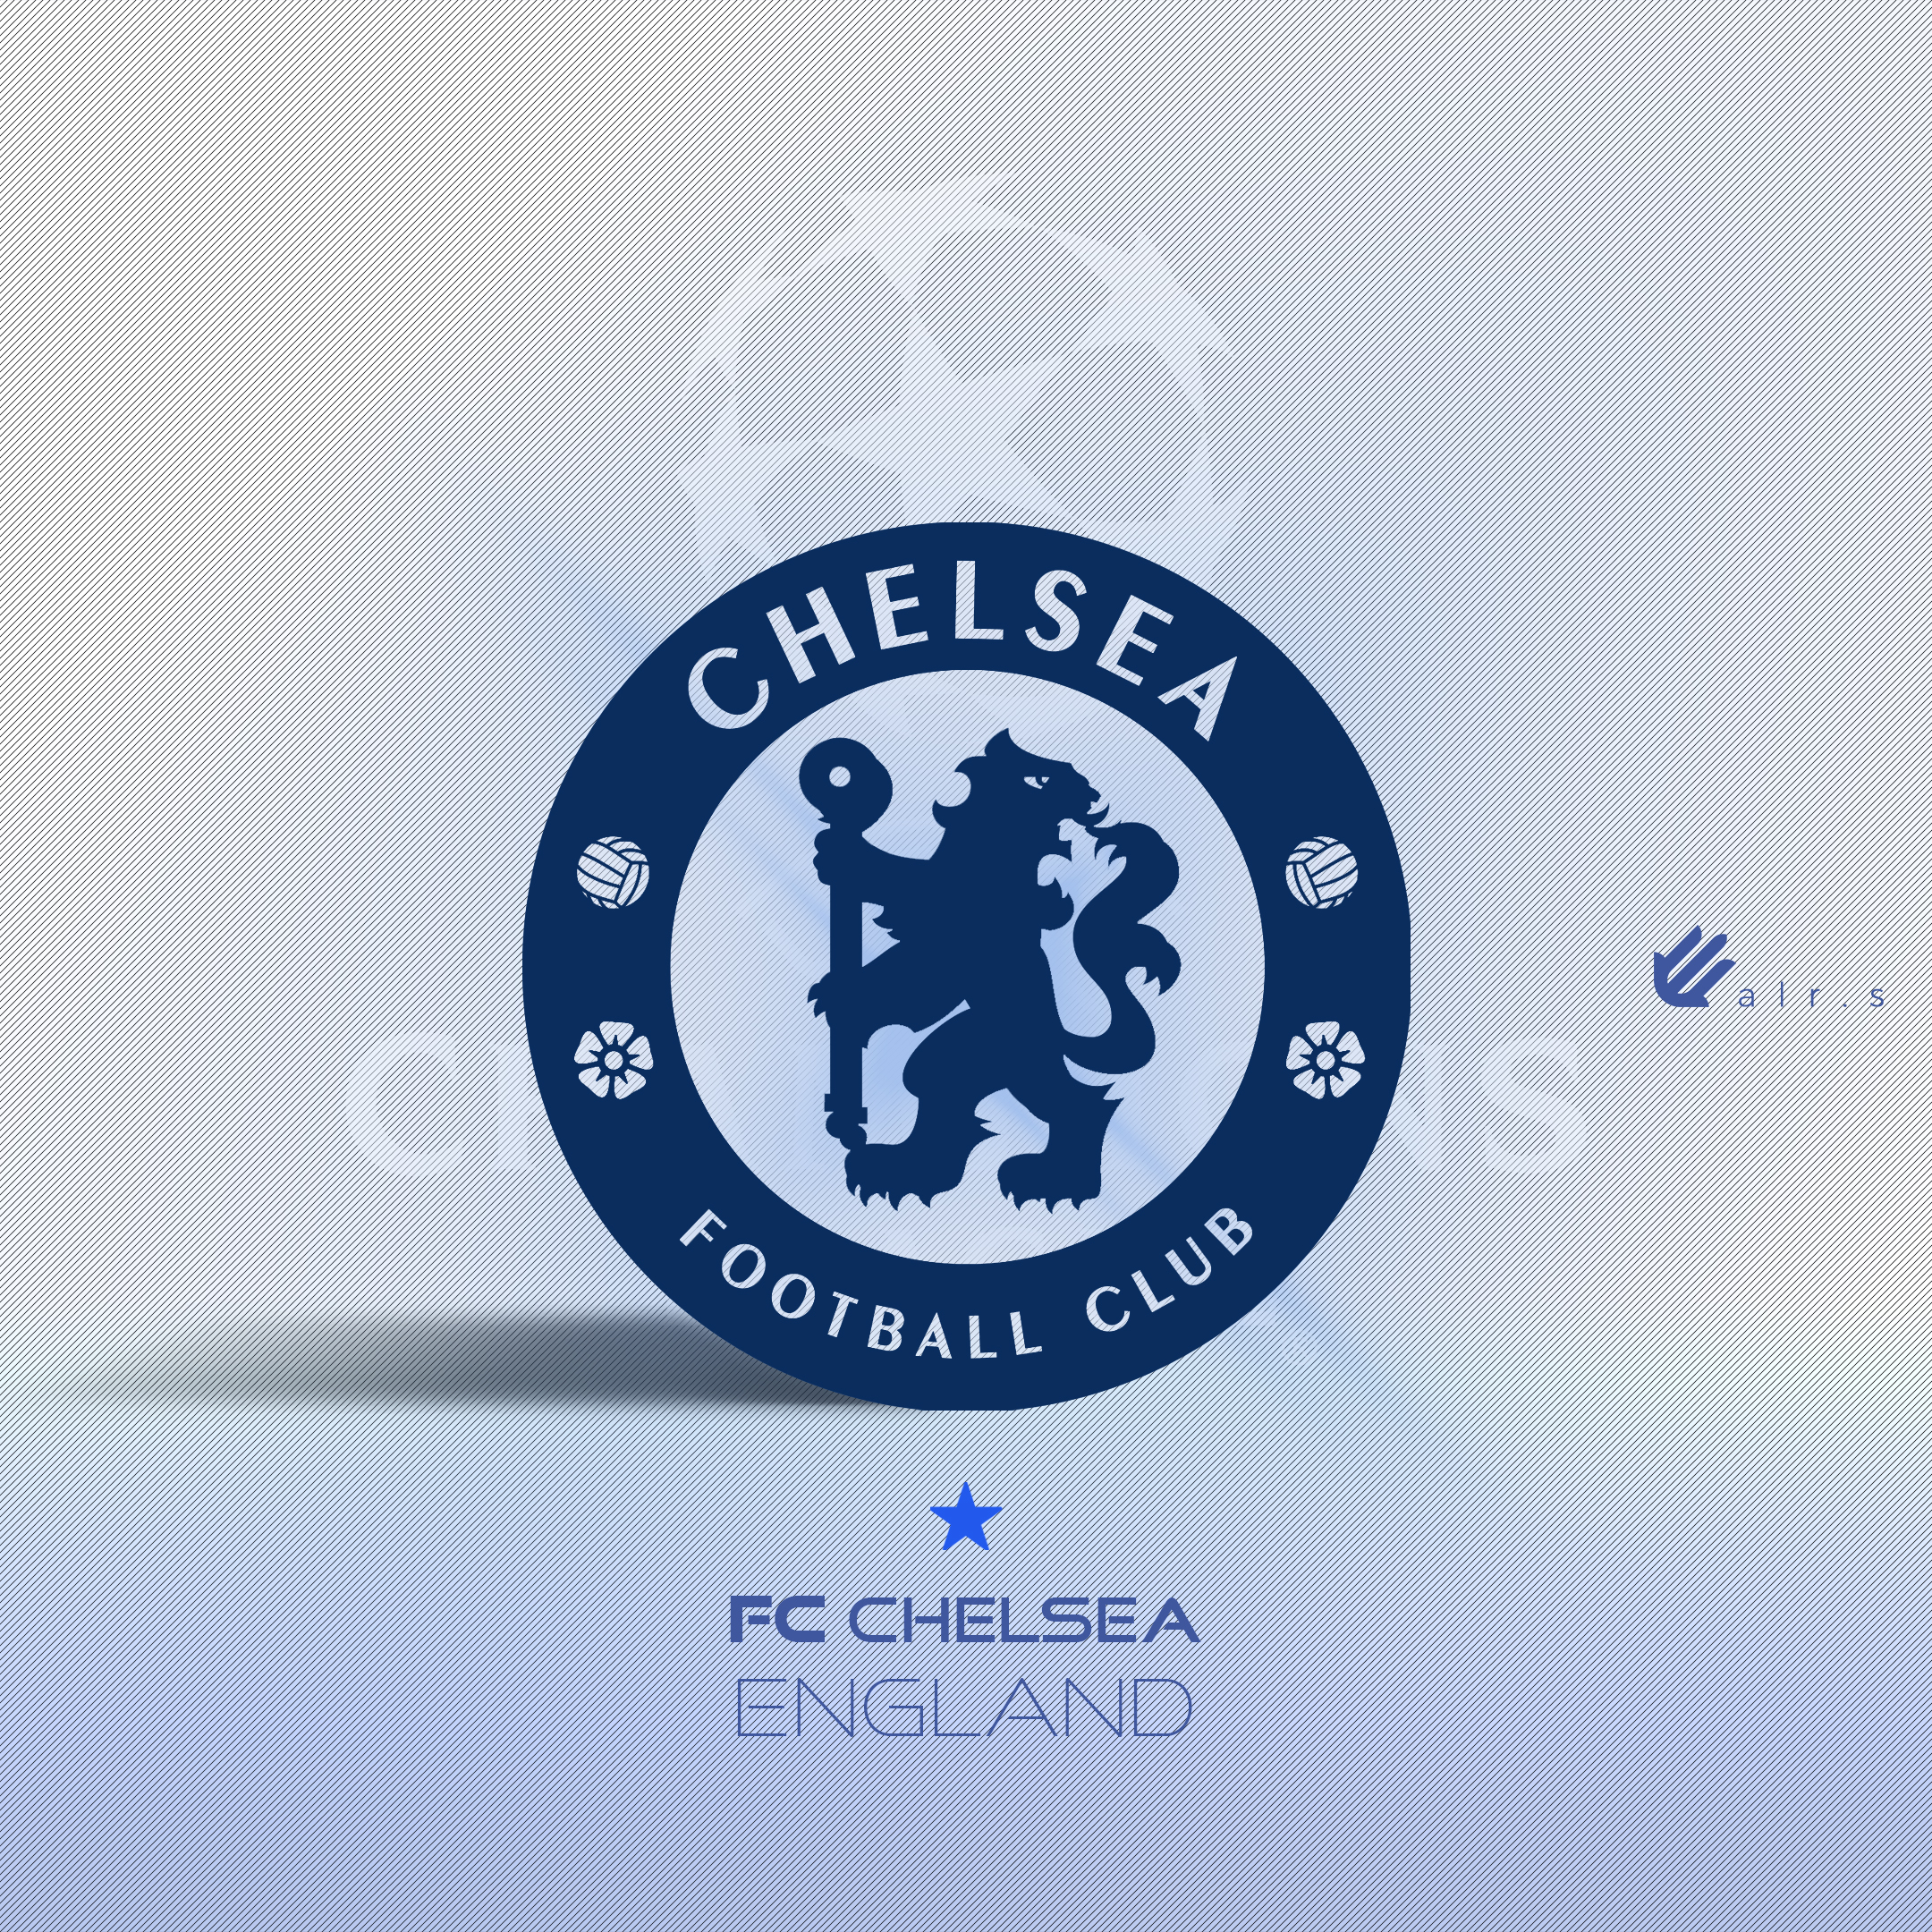 General 2160x2160 Football  logo Champions League clubs graphic design creativity photography colorful soccer sport Premier League soccer clubs Chelsea FC simple background watermarked digital art